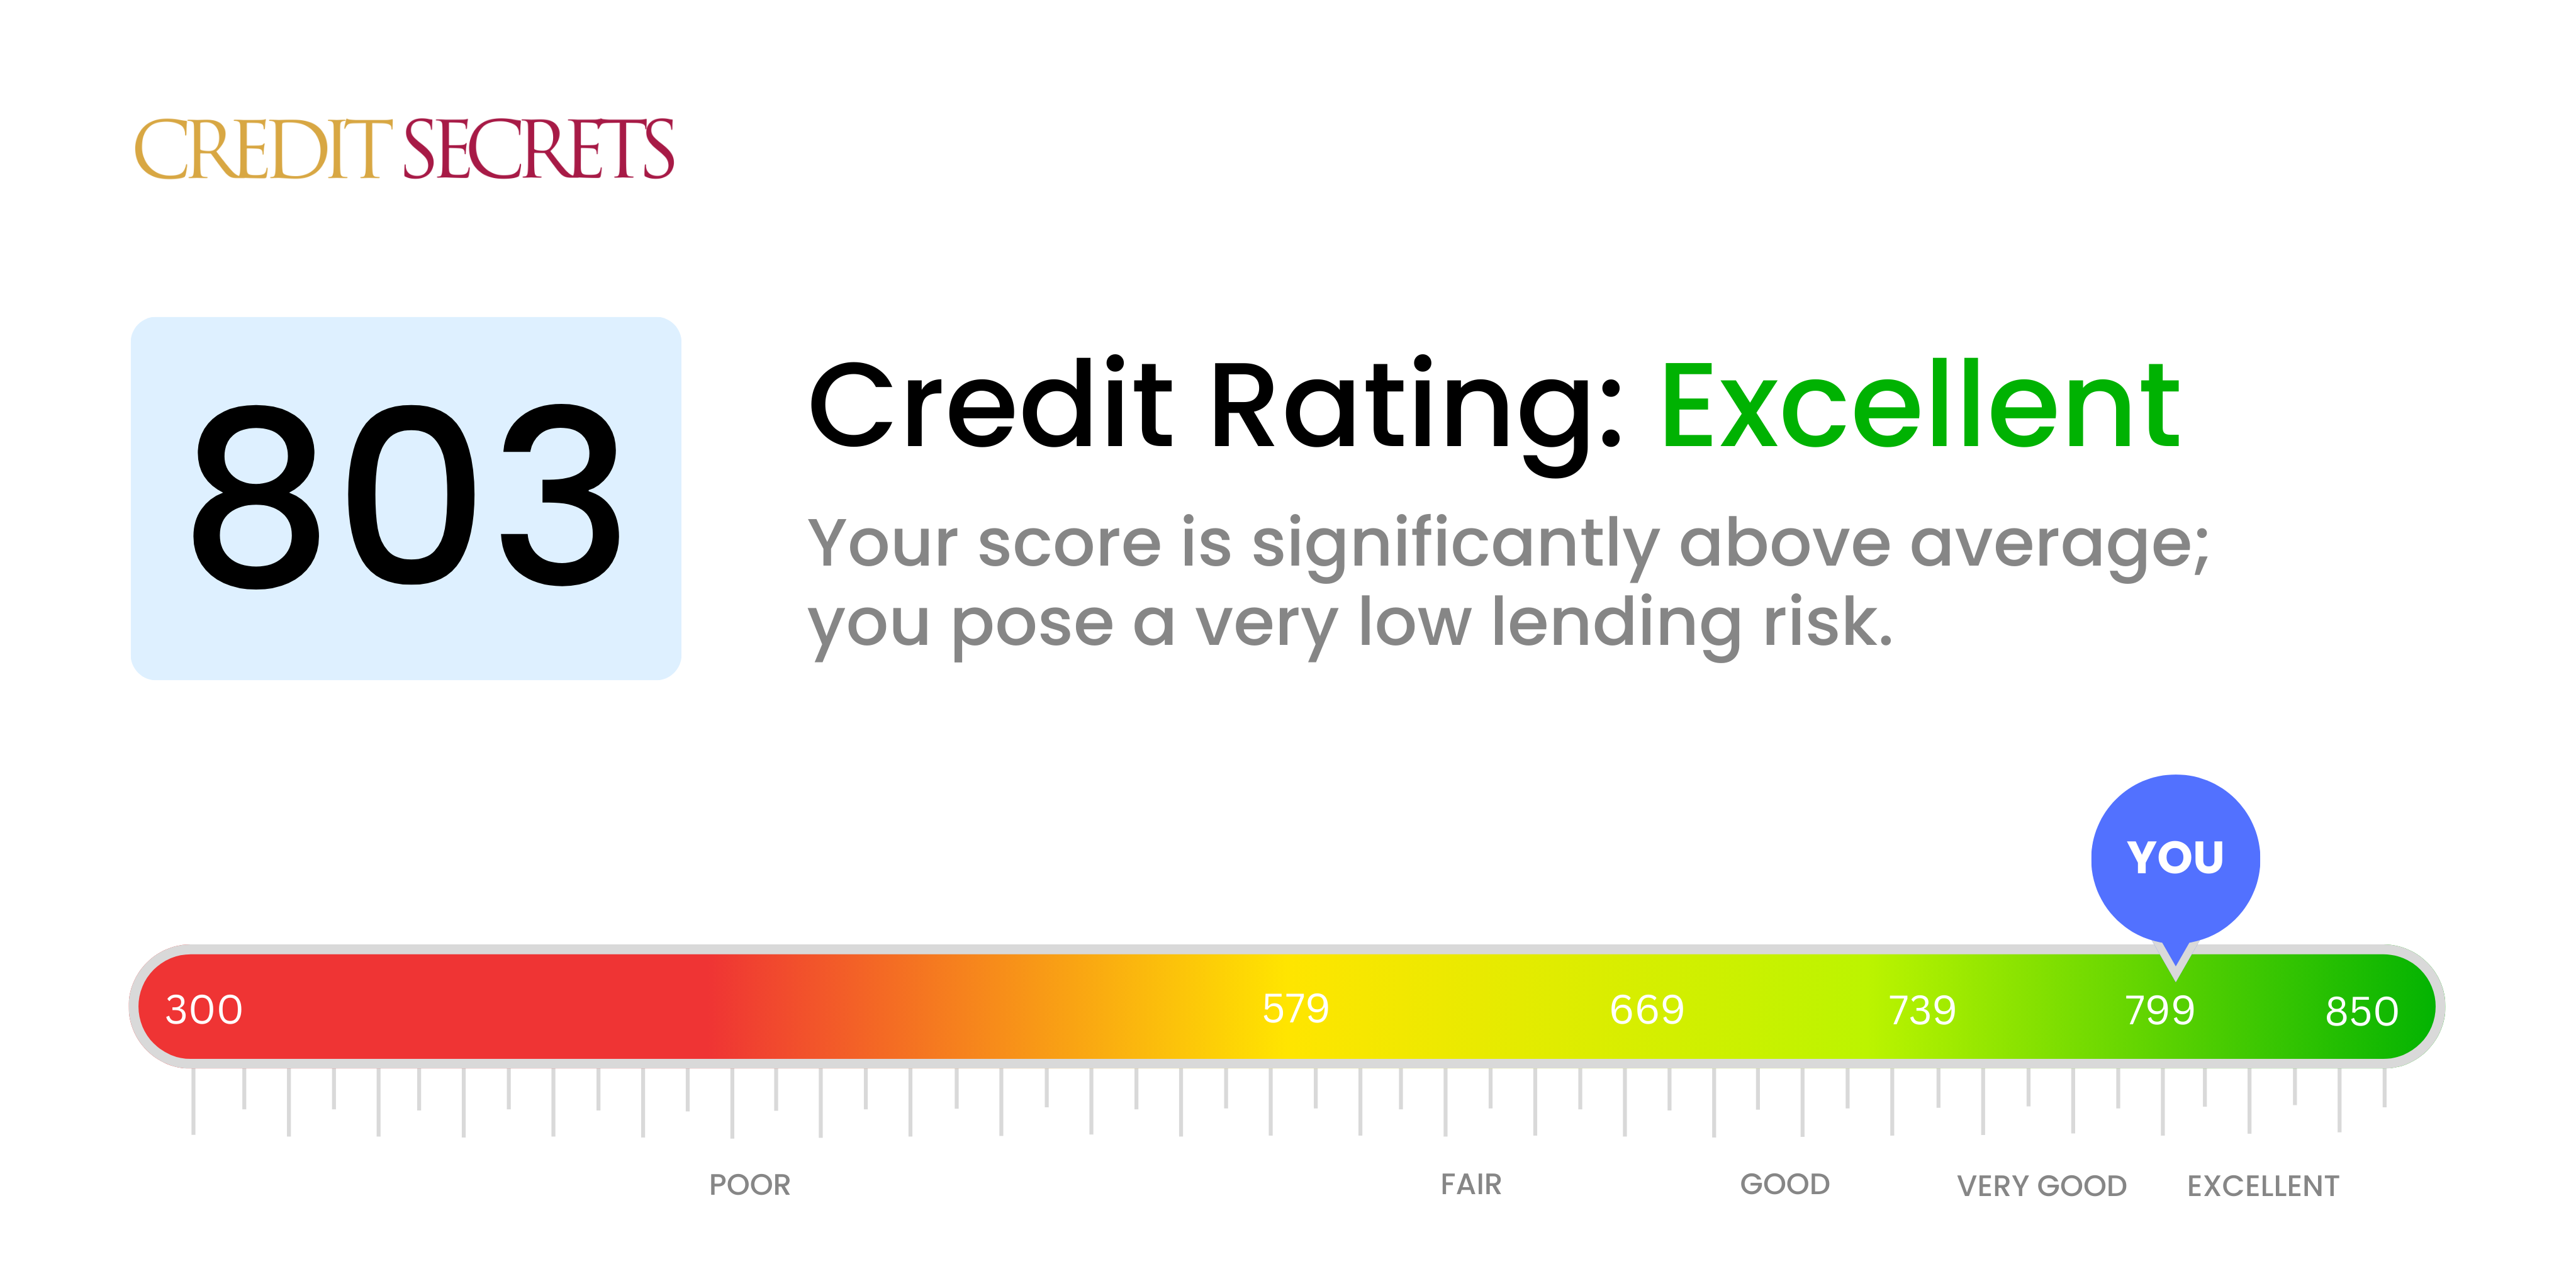 Is 803 a good credit score?